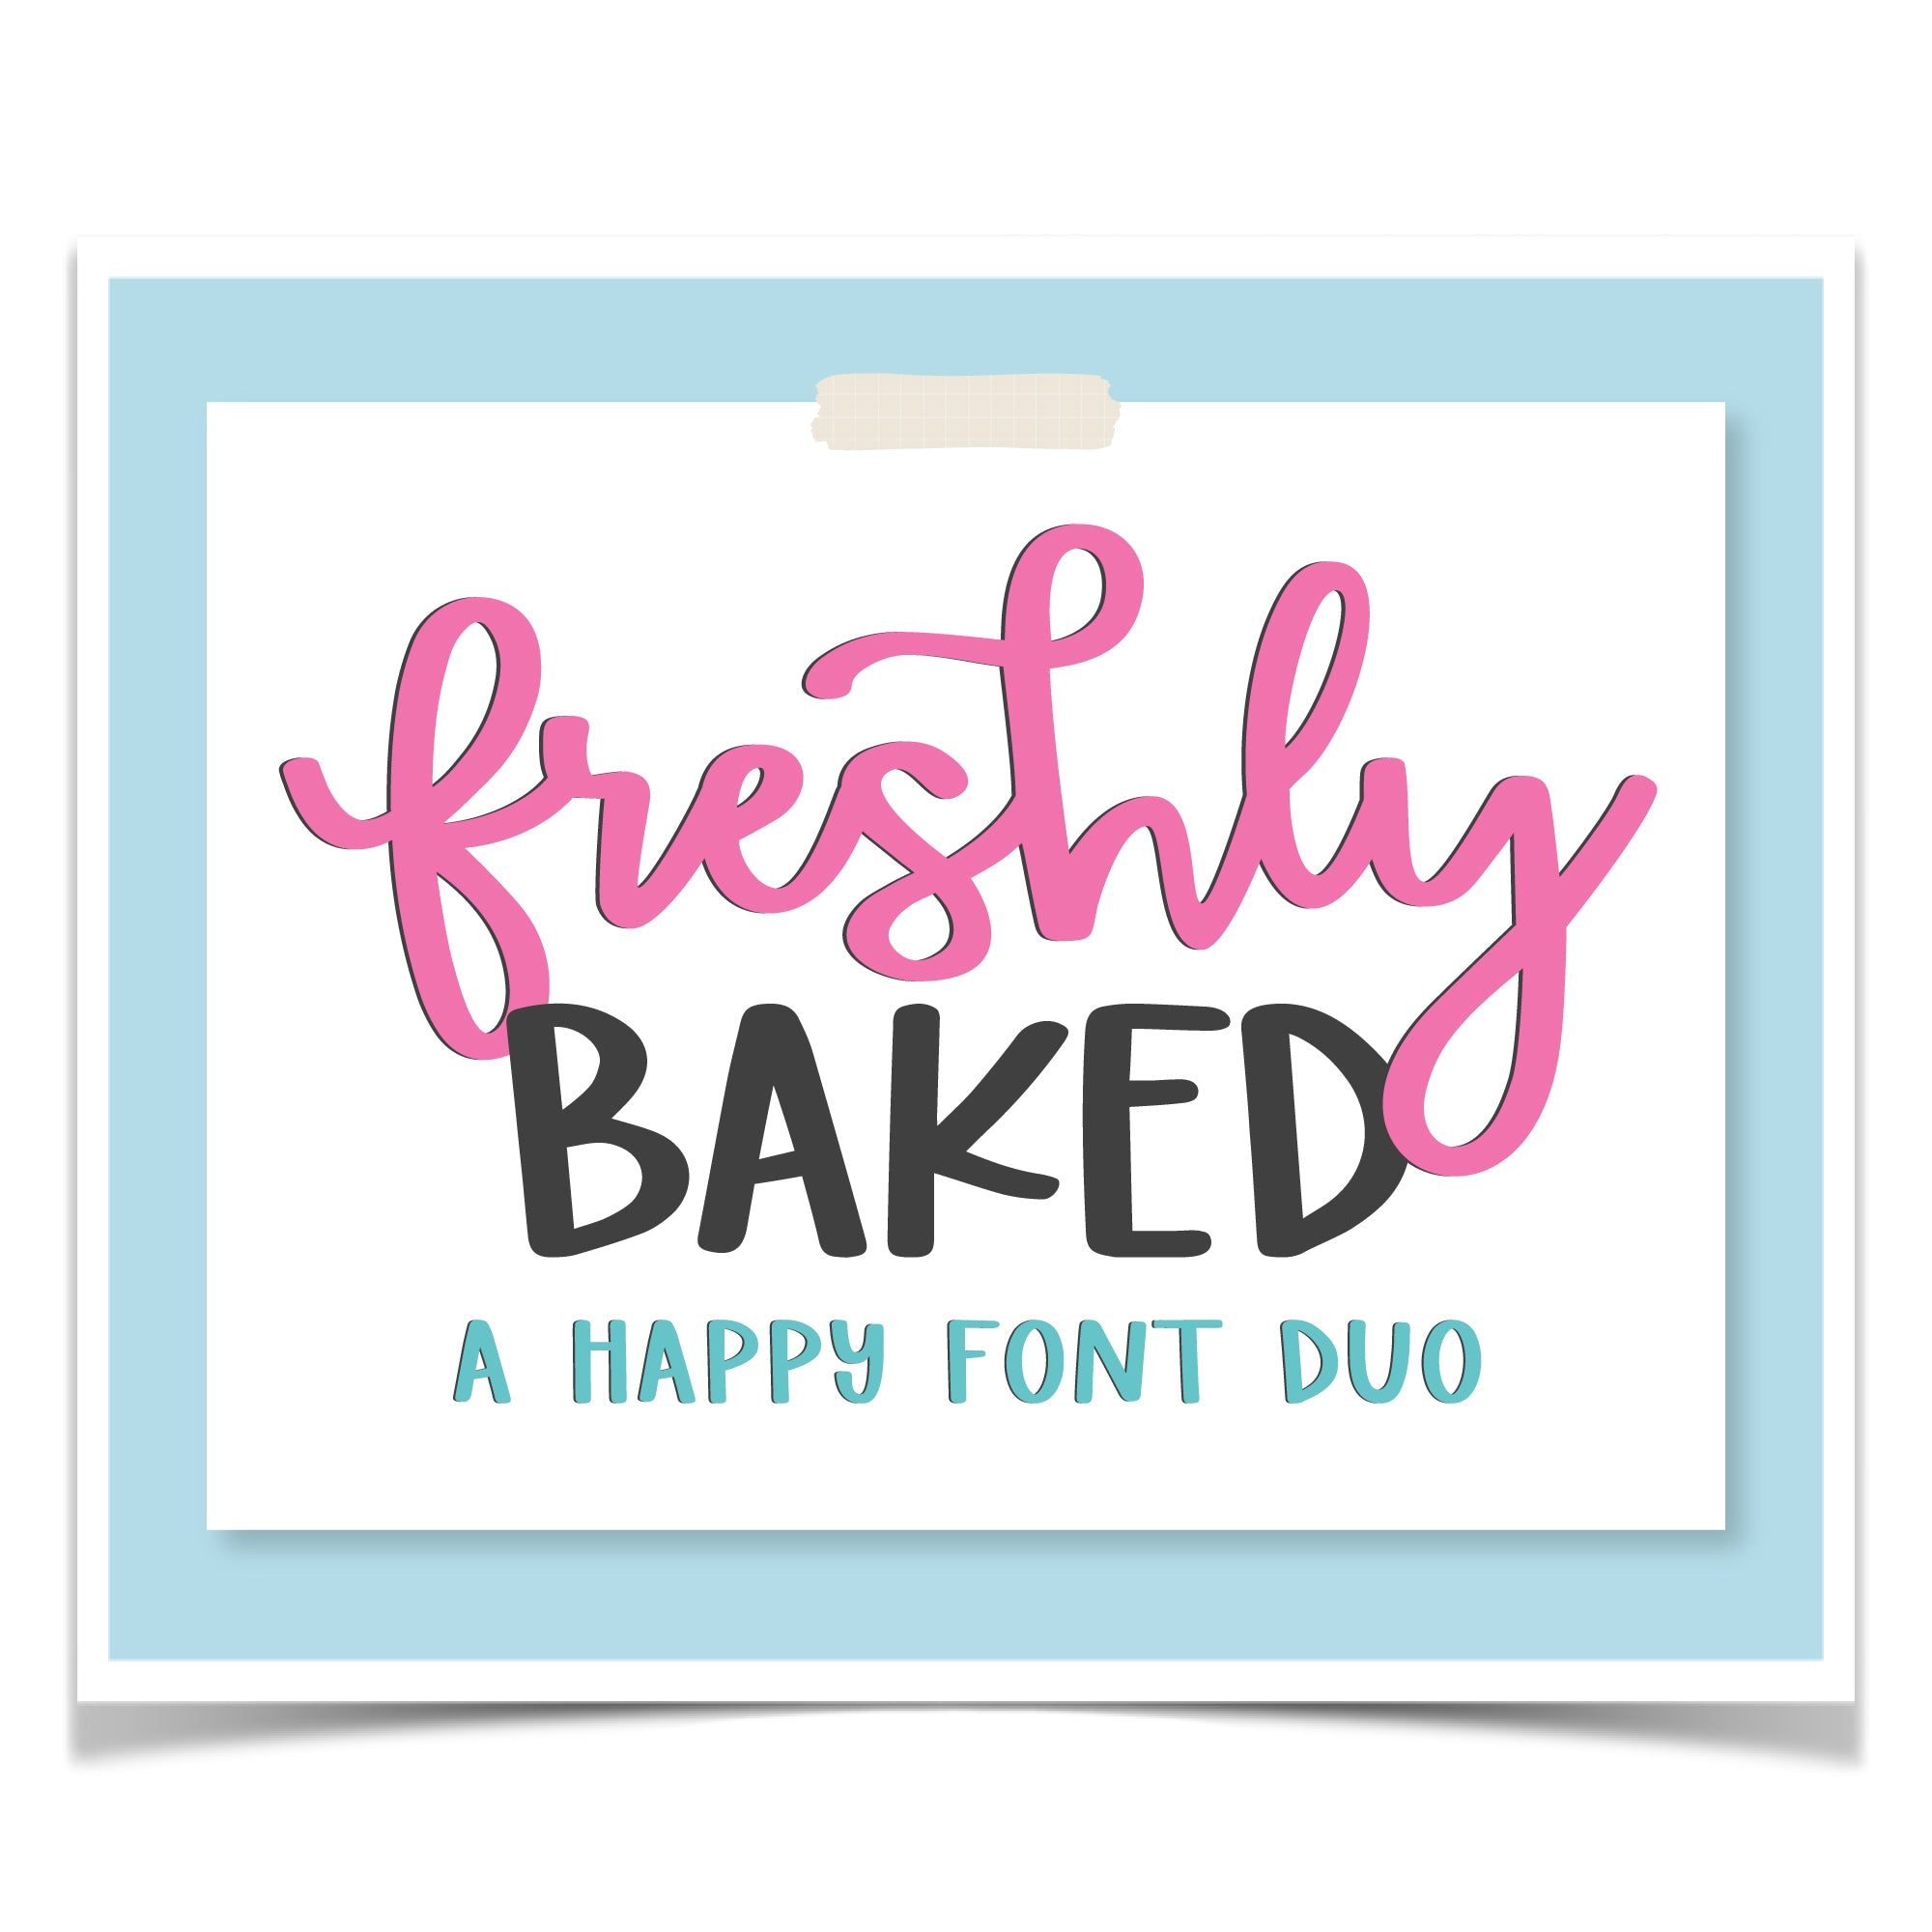 Freshly Baked Font Duo